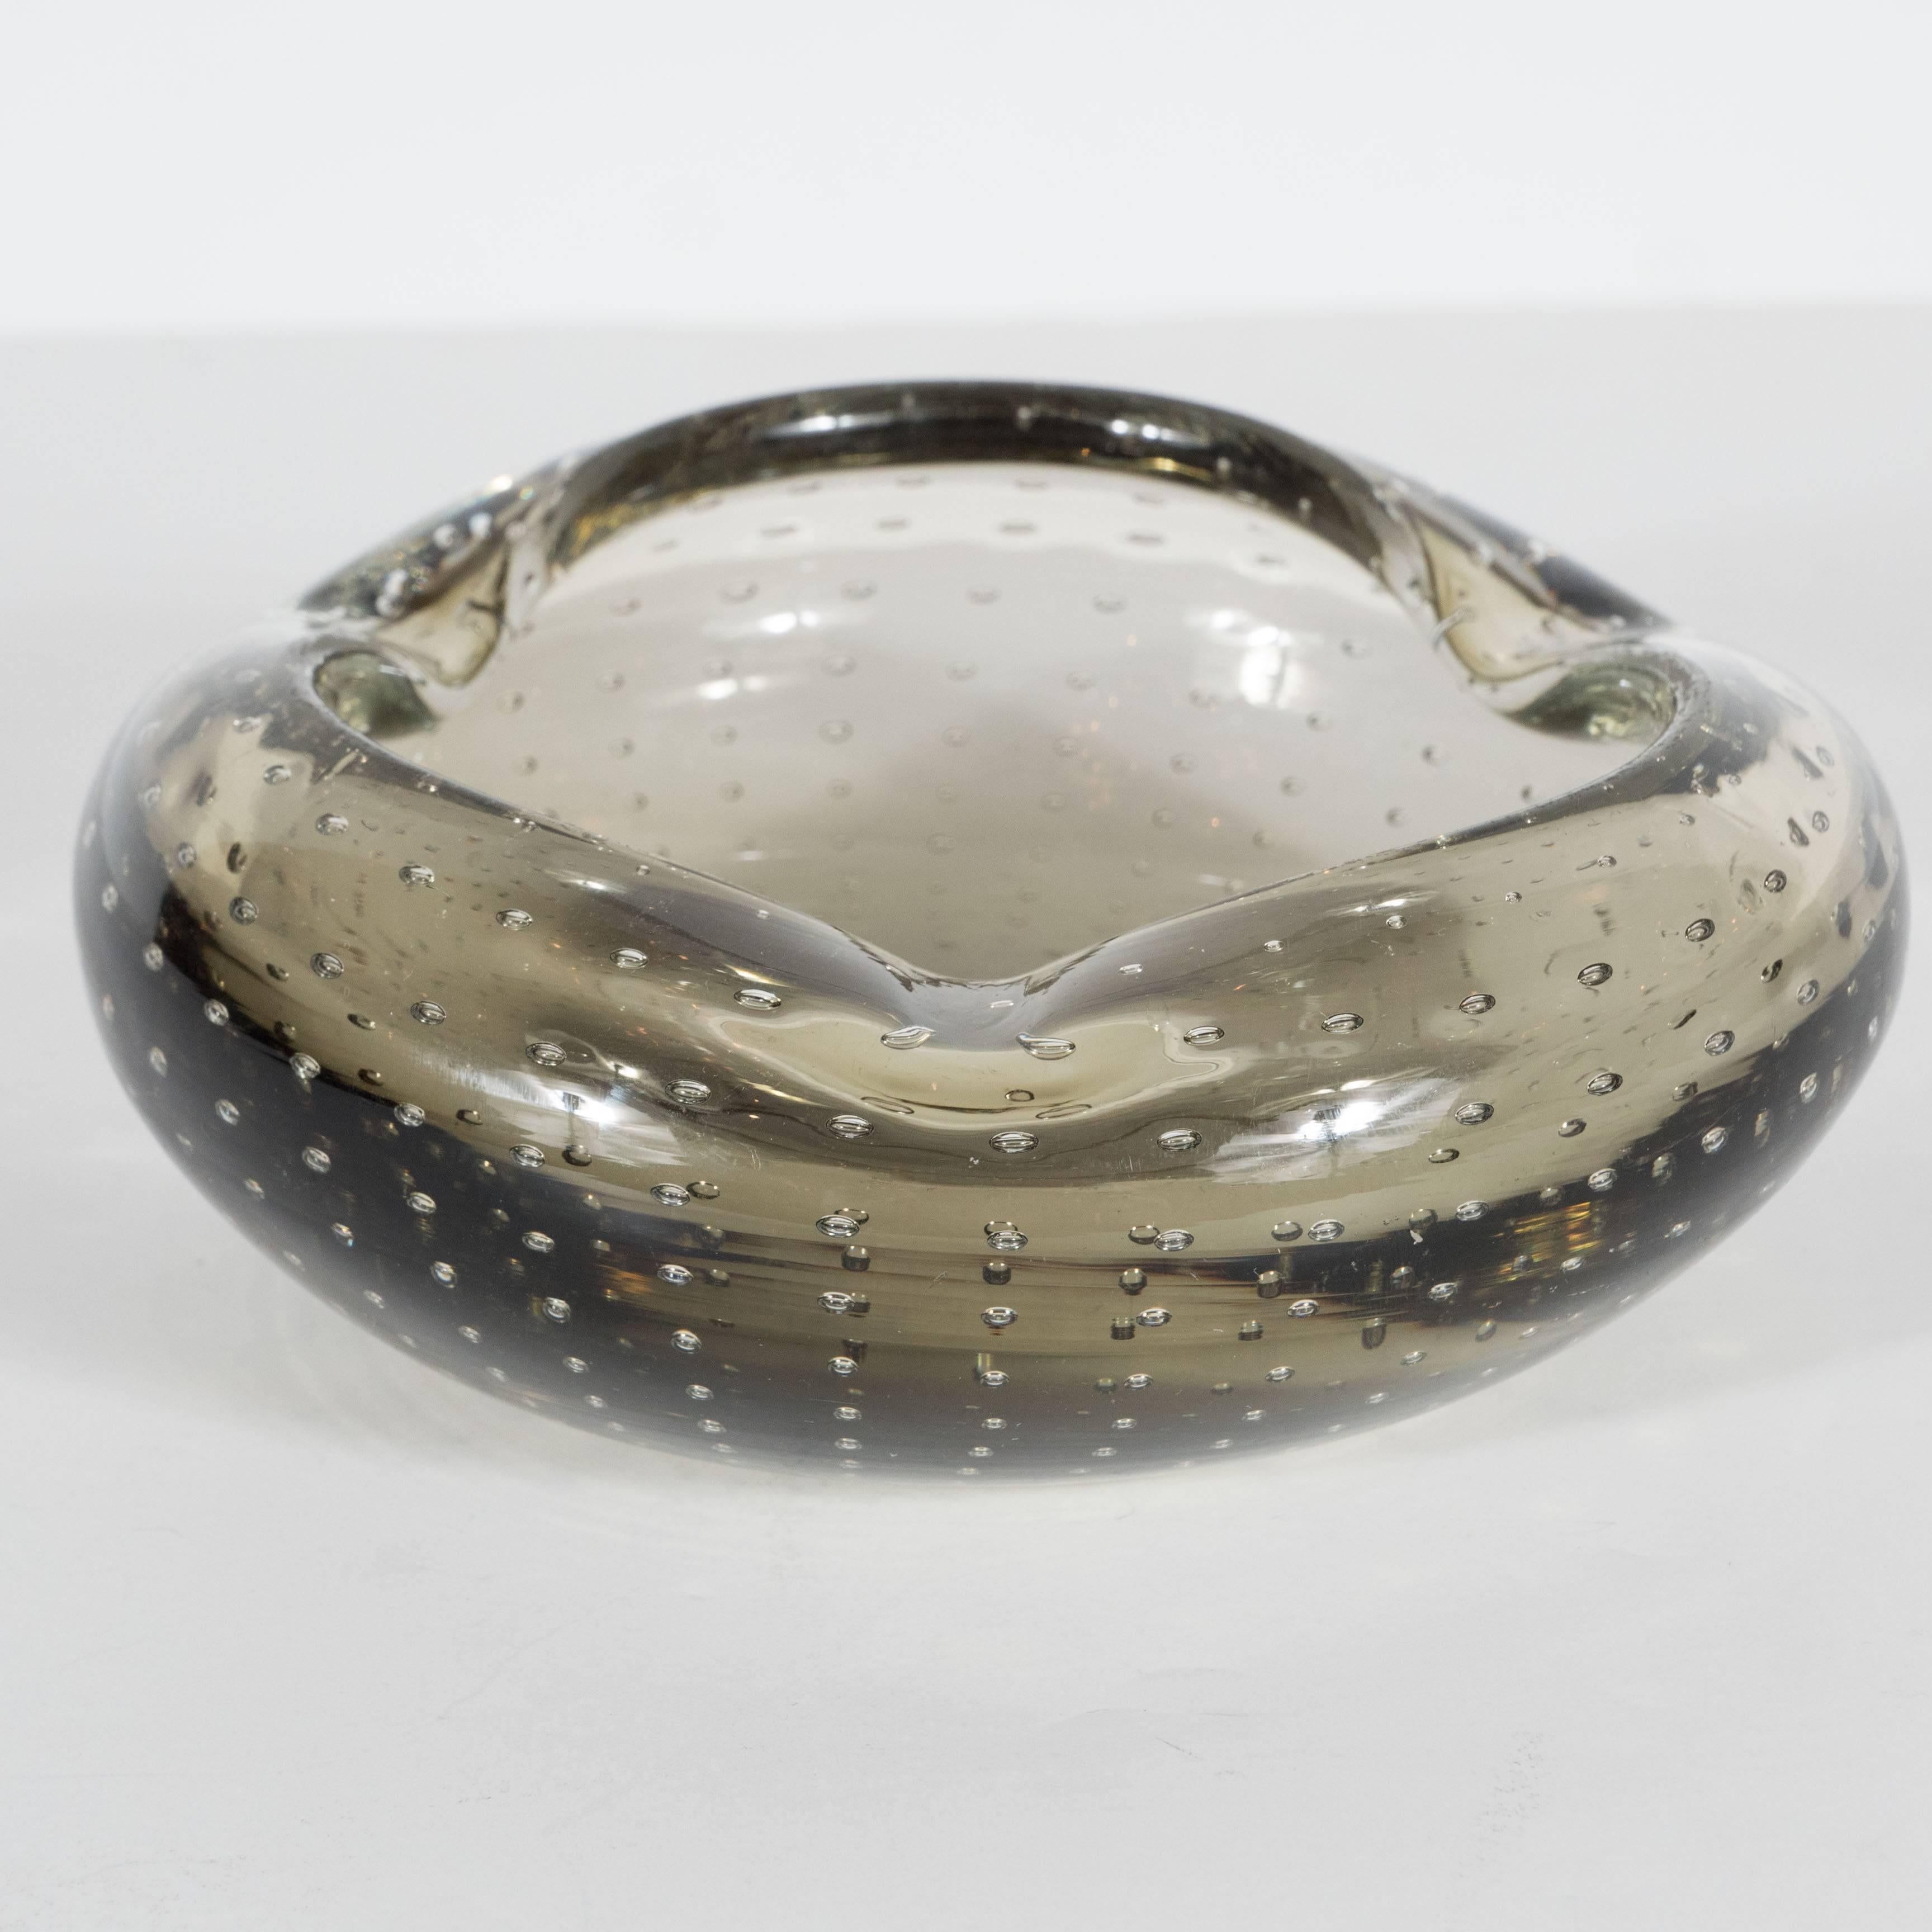 Ultra chic Mid-Century Modern smoked grey Murano glass bowl/ashtray, Italy, circa 1950, the hand blown Murano glass with air bubble inclusion pattern attractively shaped in an organic form. An elegant vide poches, 
Italy, circa 1950. Excellent